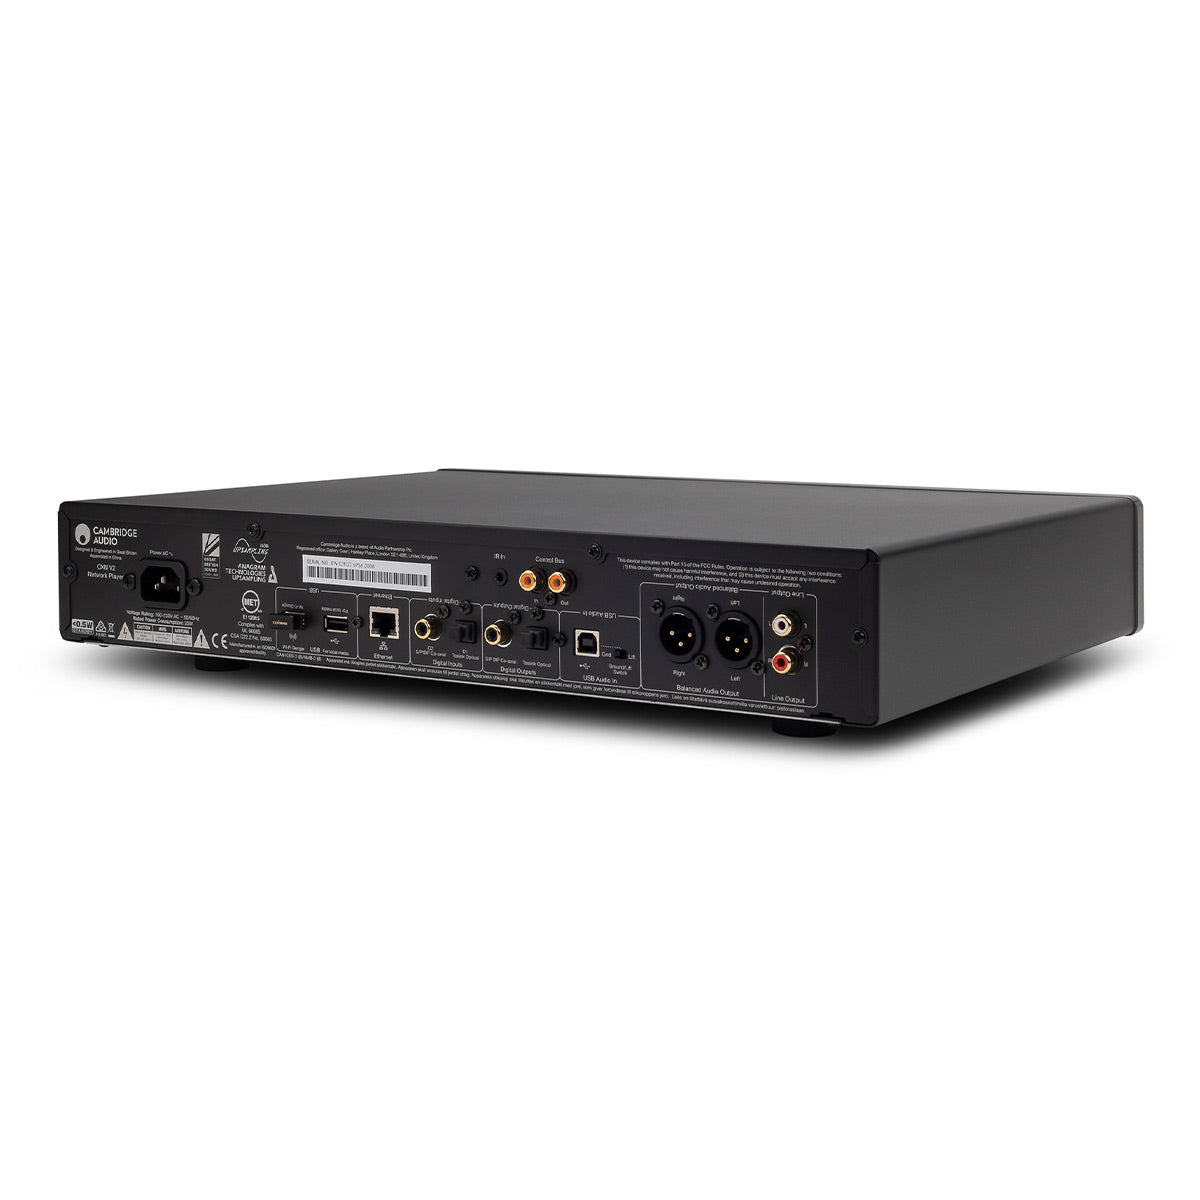 Cambridge Audio CXN V2 All-in-One Network Audio Streamer with Airplay2, Chromecast, Roon Ready, and Built-In Dual DACs (Gray)